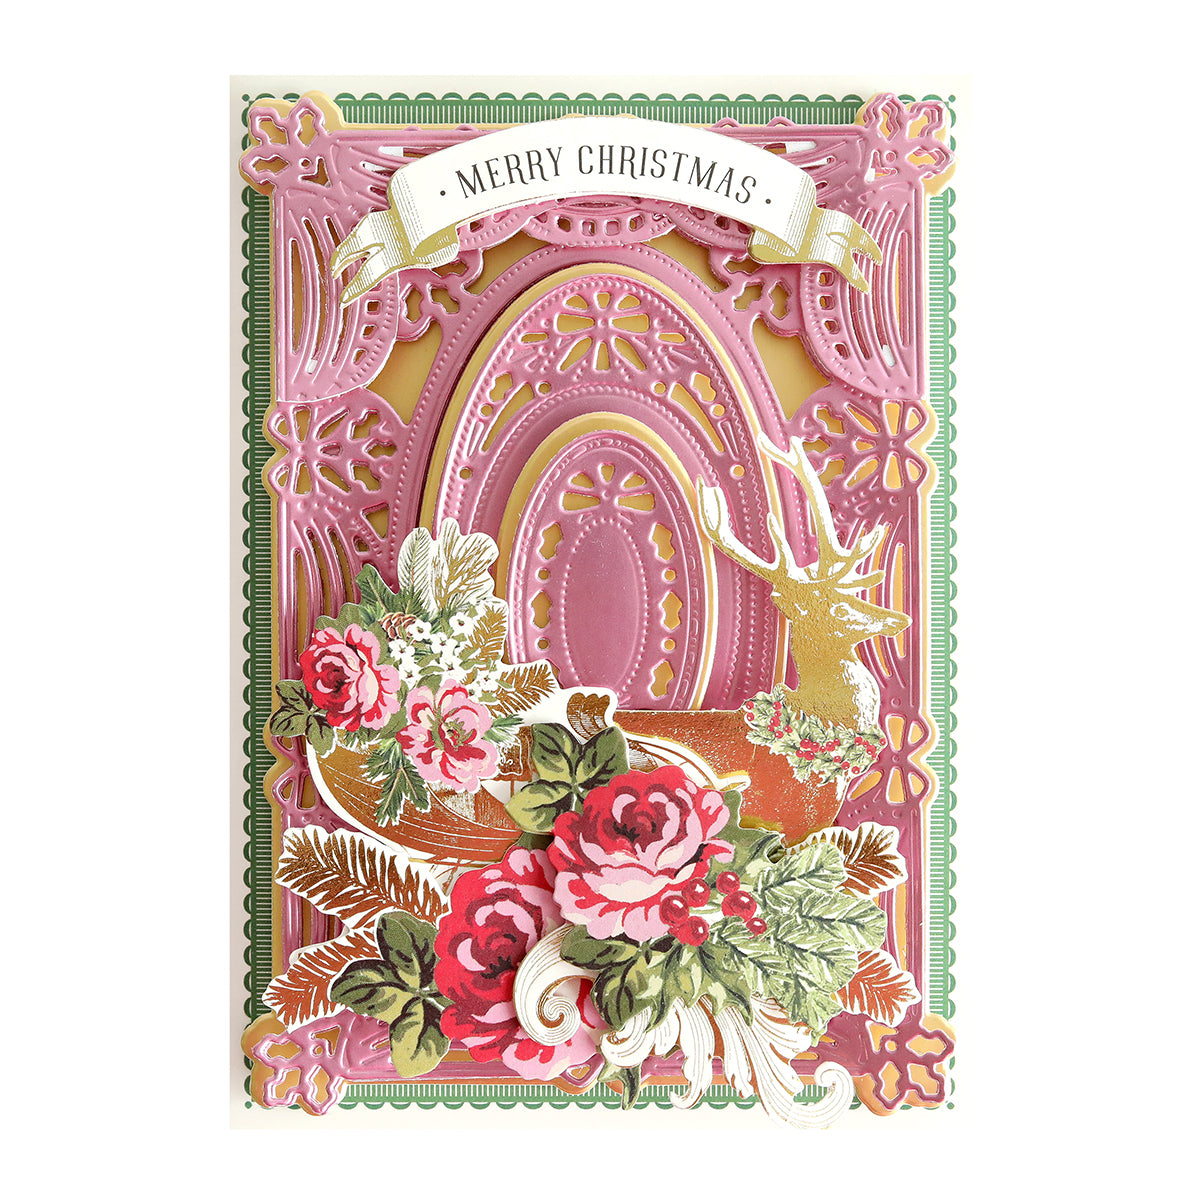 An Anna Griffin Christmas Wishes 3D Concentric Dies luxury matte foil cardstock Christmas card is adorned with delicate pink roses and a charming deer.